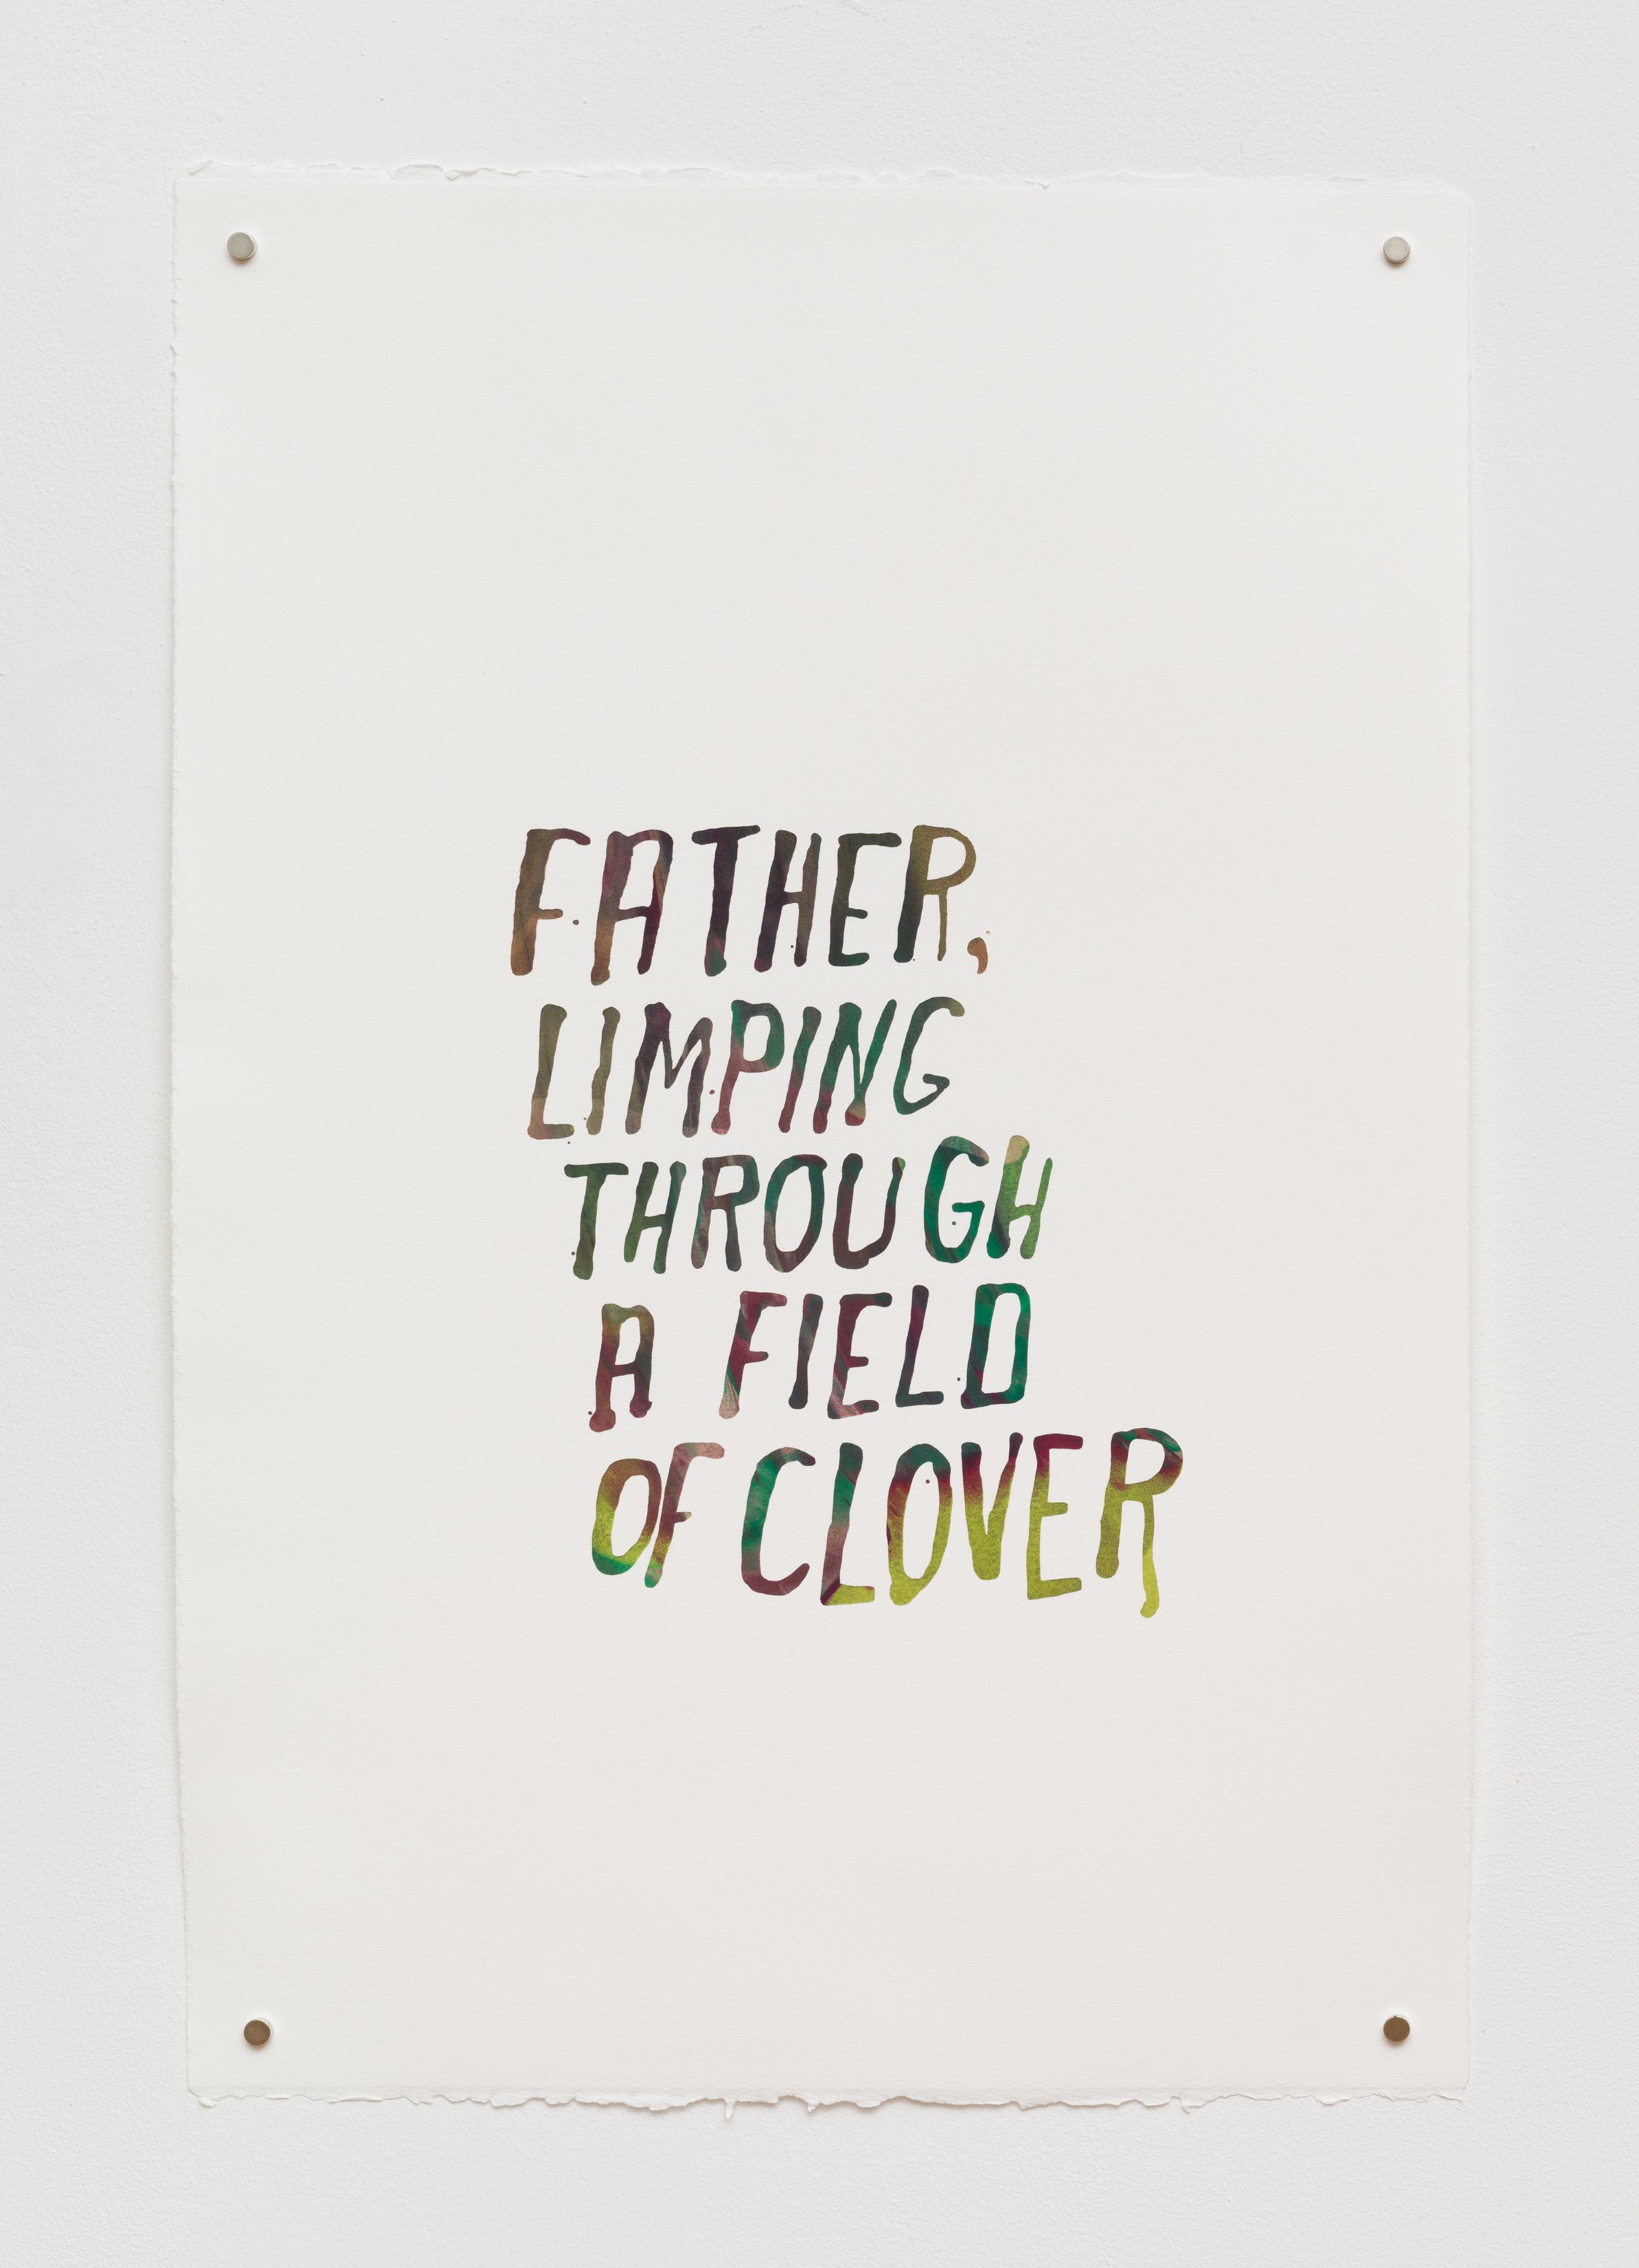 Steve Reinke, Untitled (Father, Limping), 2021, silkscreen on BFK Rives paper, 22 x 15 in.